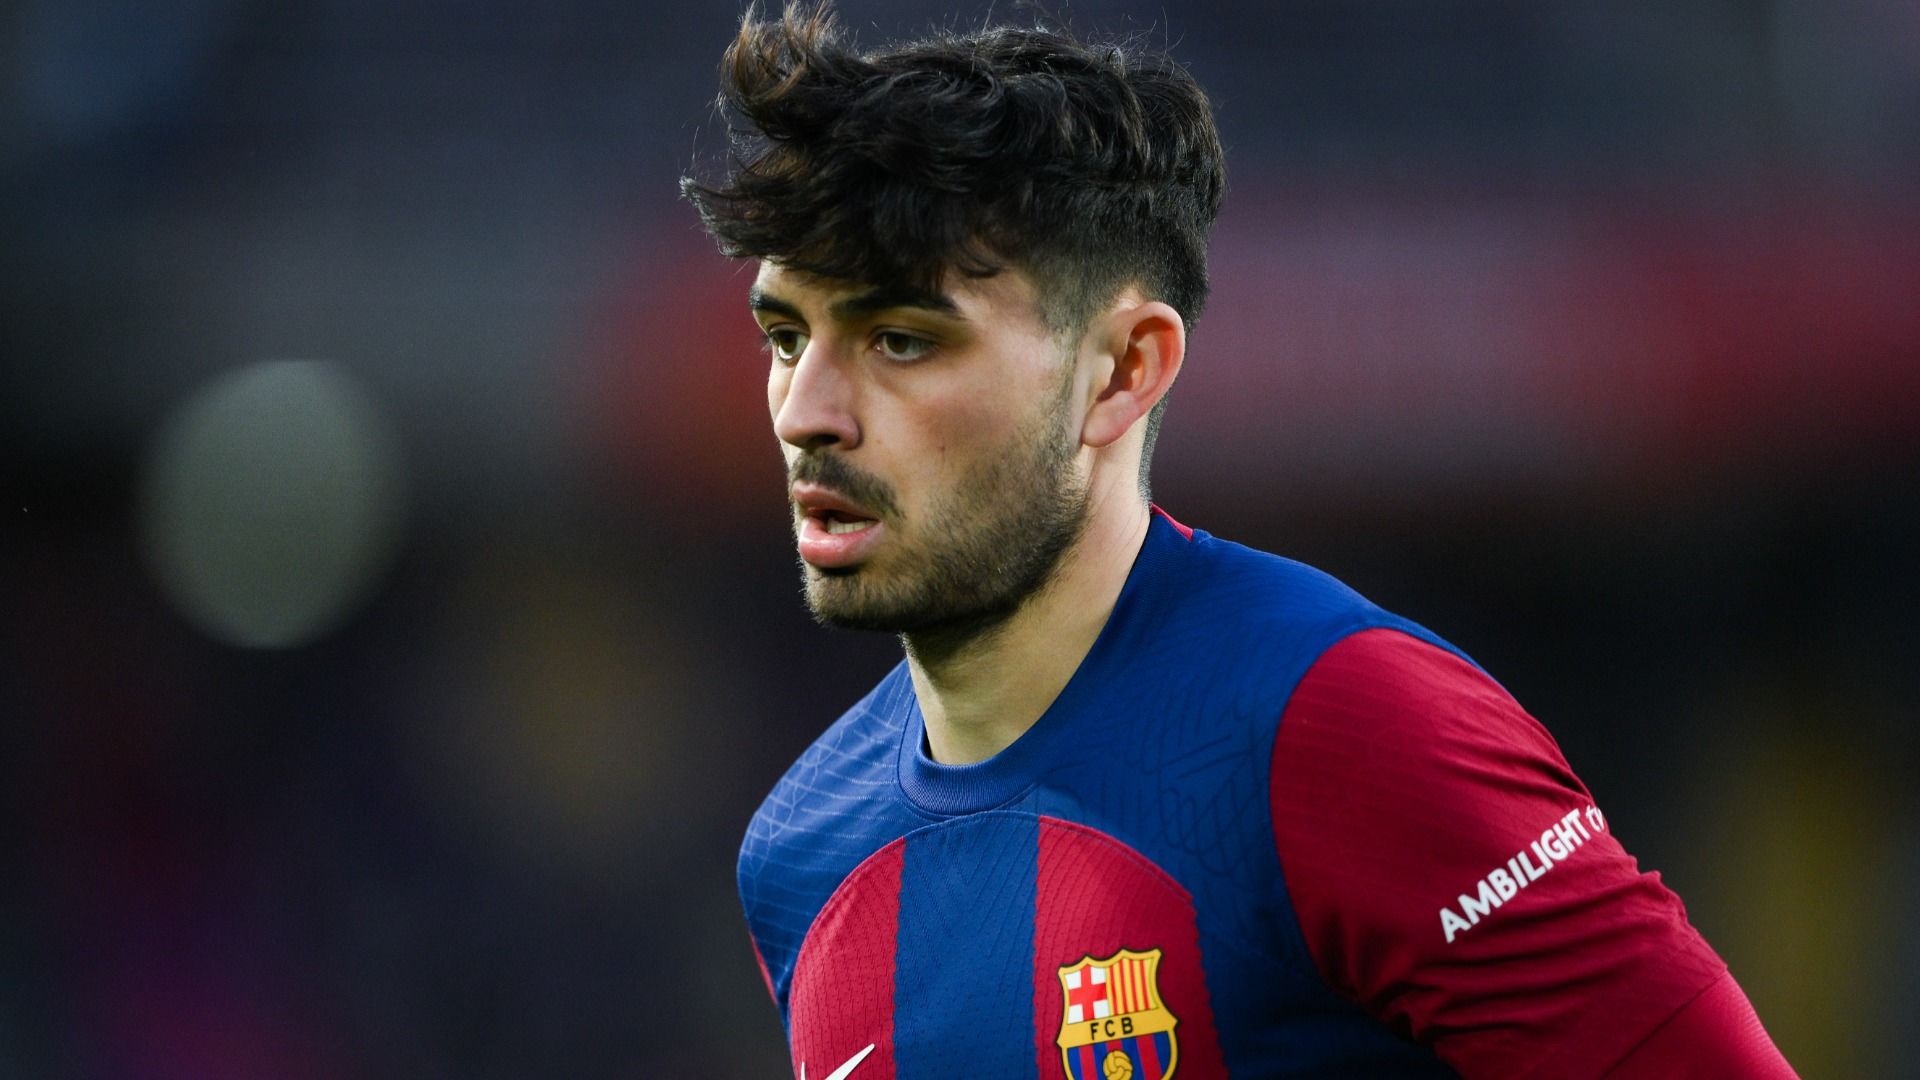 Barcelona Want To Sell 21-Year-Old Midfielder Pedri This Summer